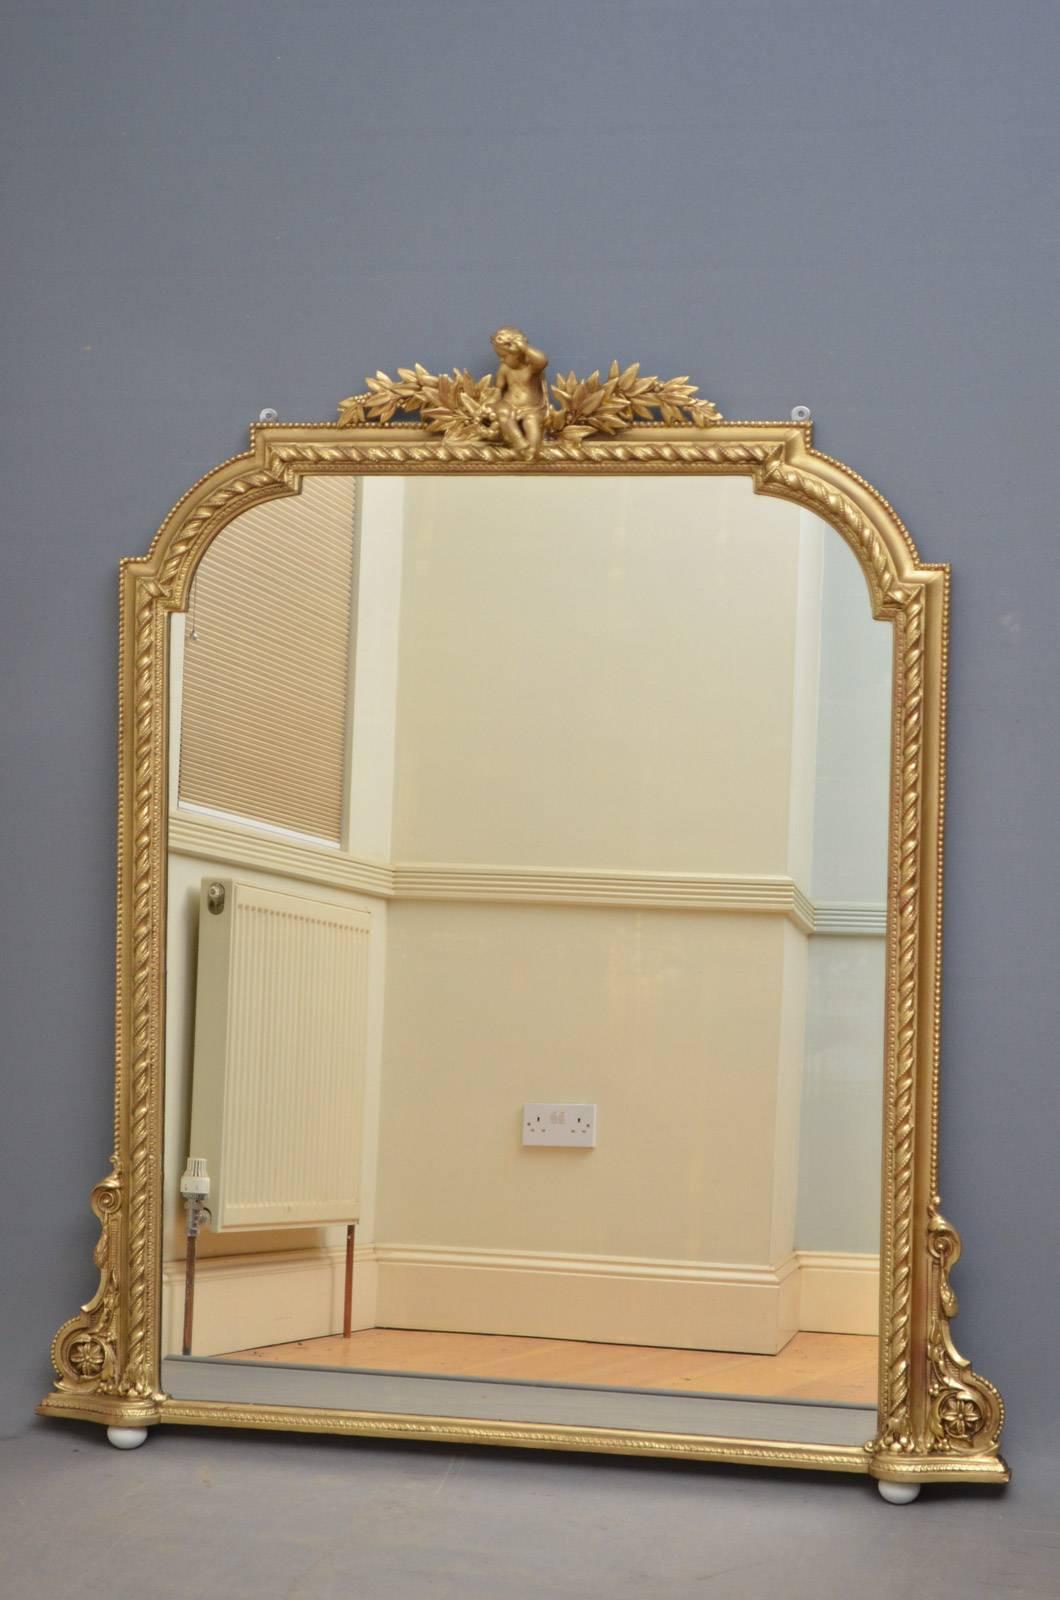 Sn4311, Victorian gilded overmantel mirror, having original mirror plate with some foxing and finely carved frame with cherub to centre and fine scrolls to base, standing on removable porcelain feet. This antique wall mirror has been refinished and